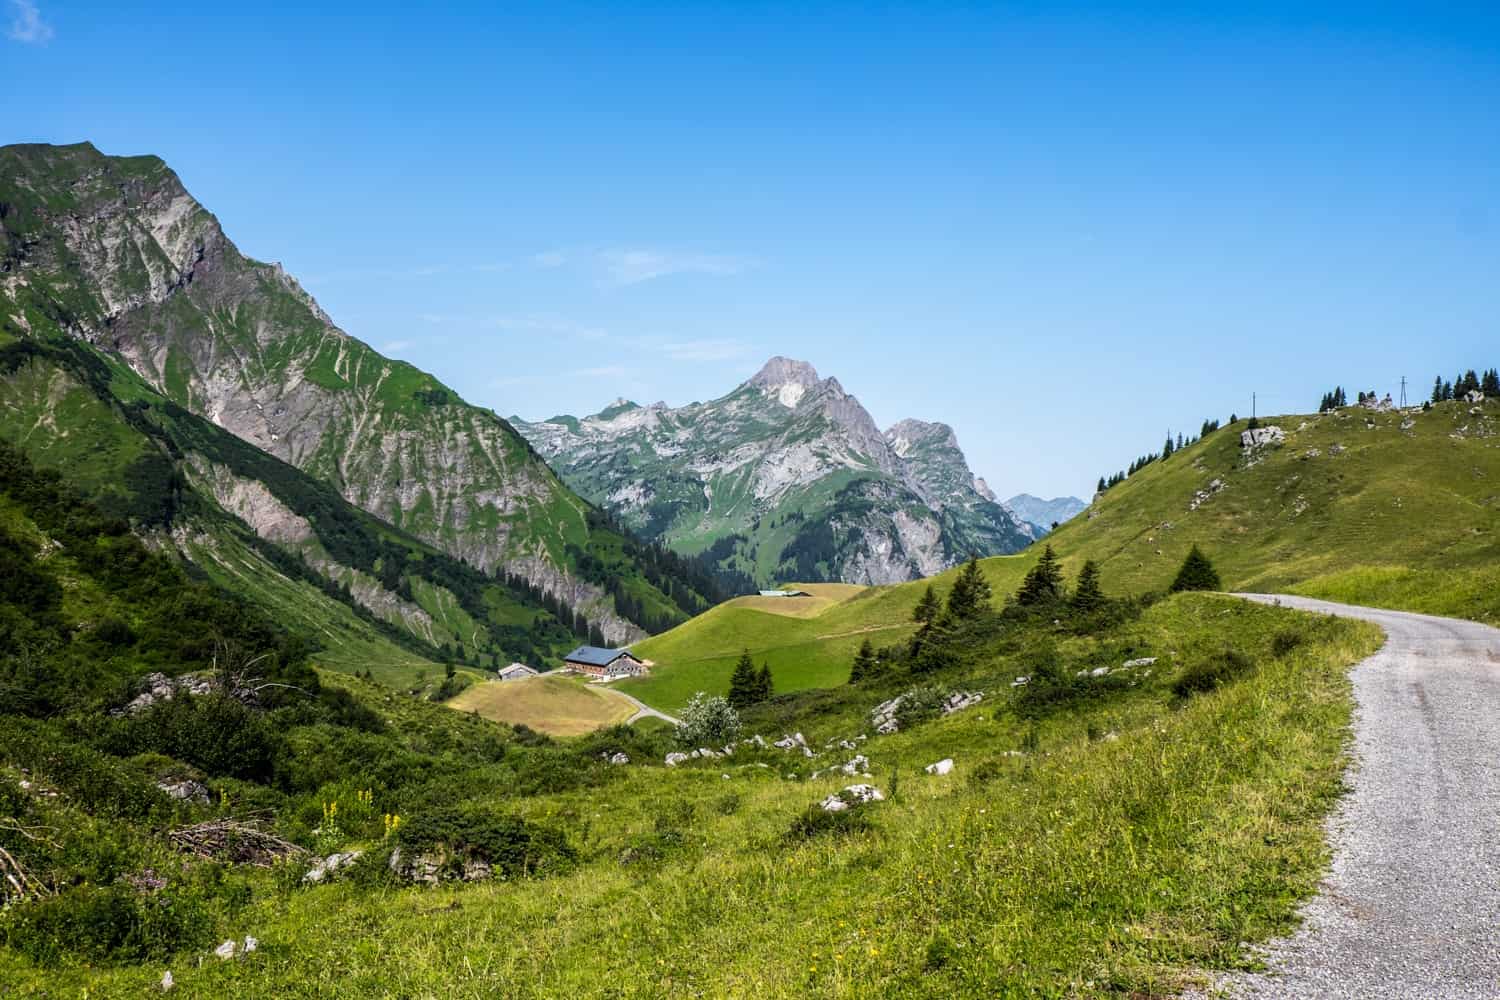 Mountain ranges seen on hiking trails in Lech, Austria